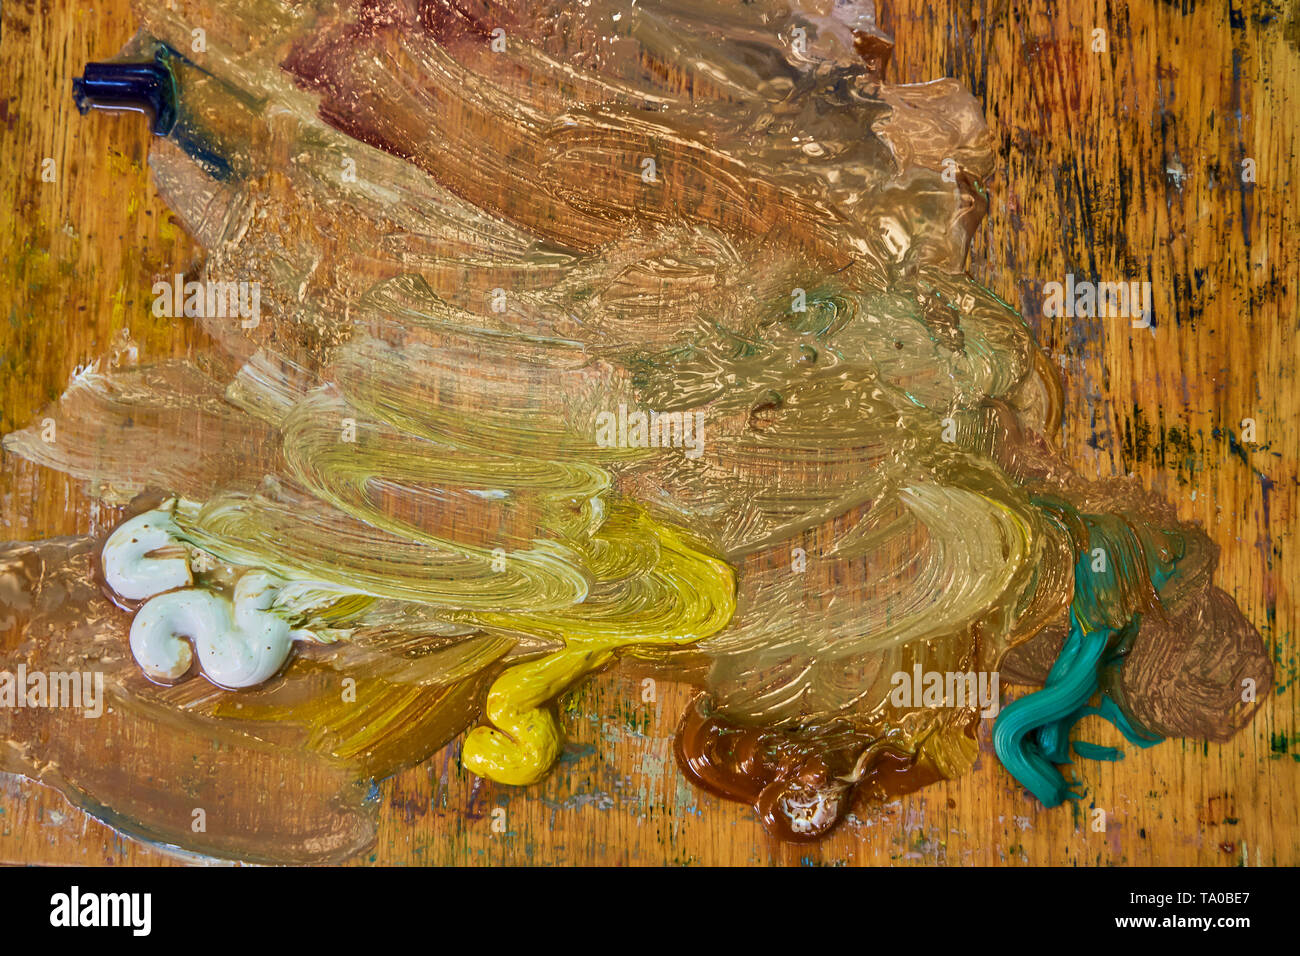 Close Up Top View of a Dry Cracked Messy Water Paint Palette Stock Photo -  Image of color, paintbrush: 251222674